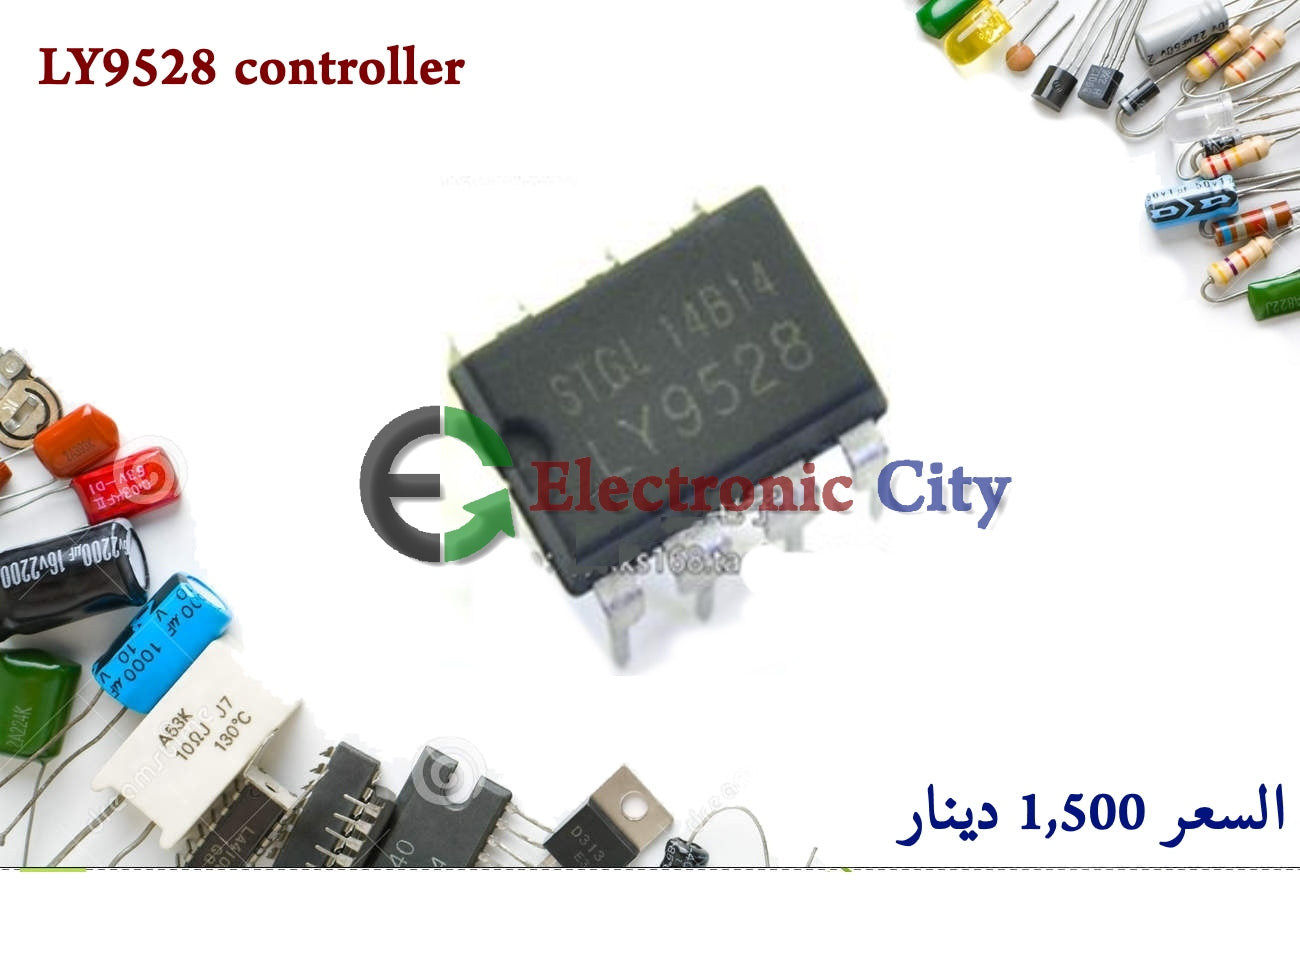 LY9528 controller